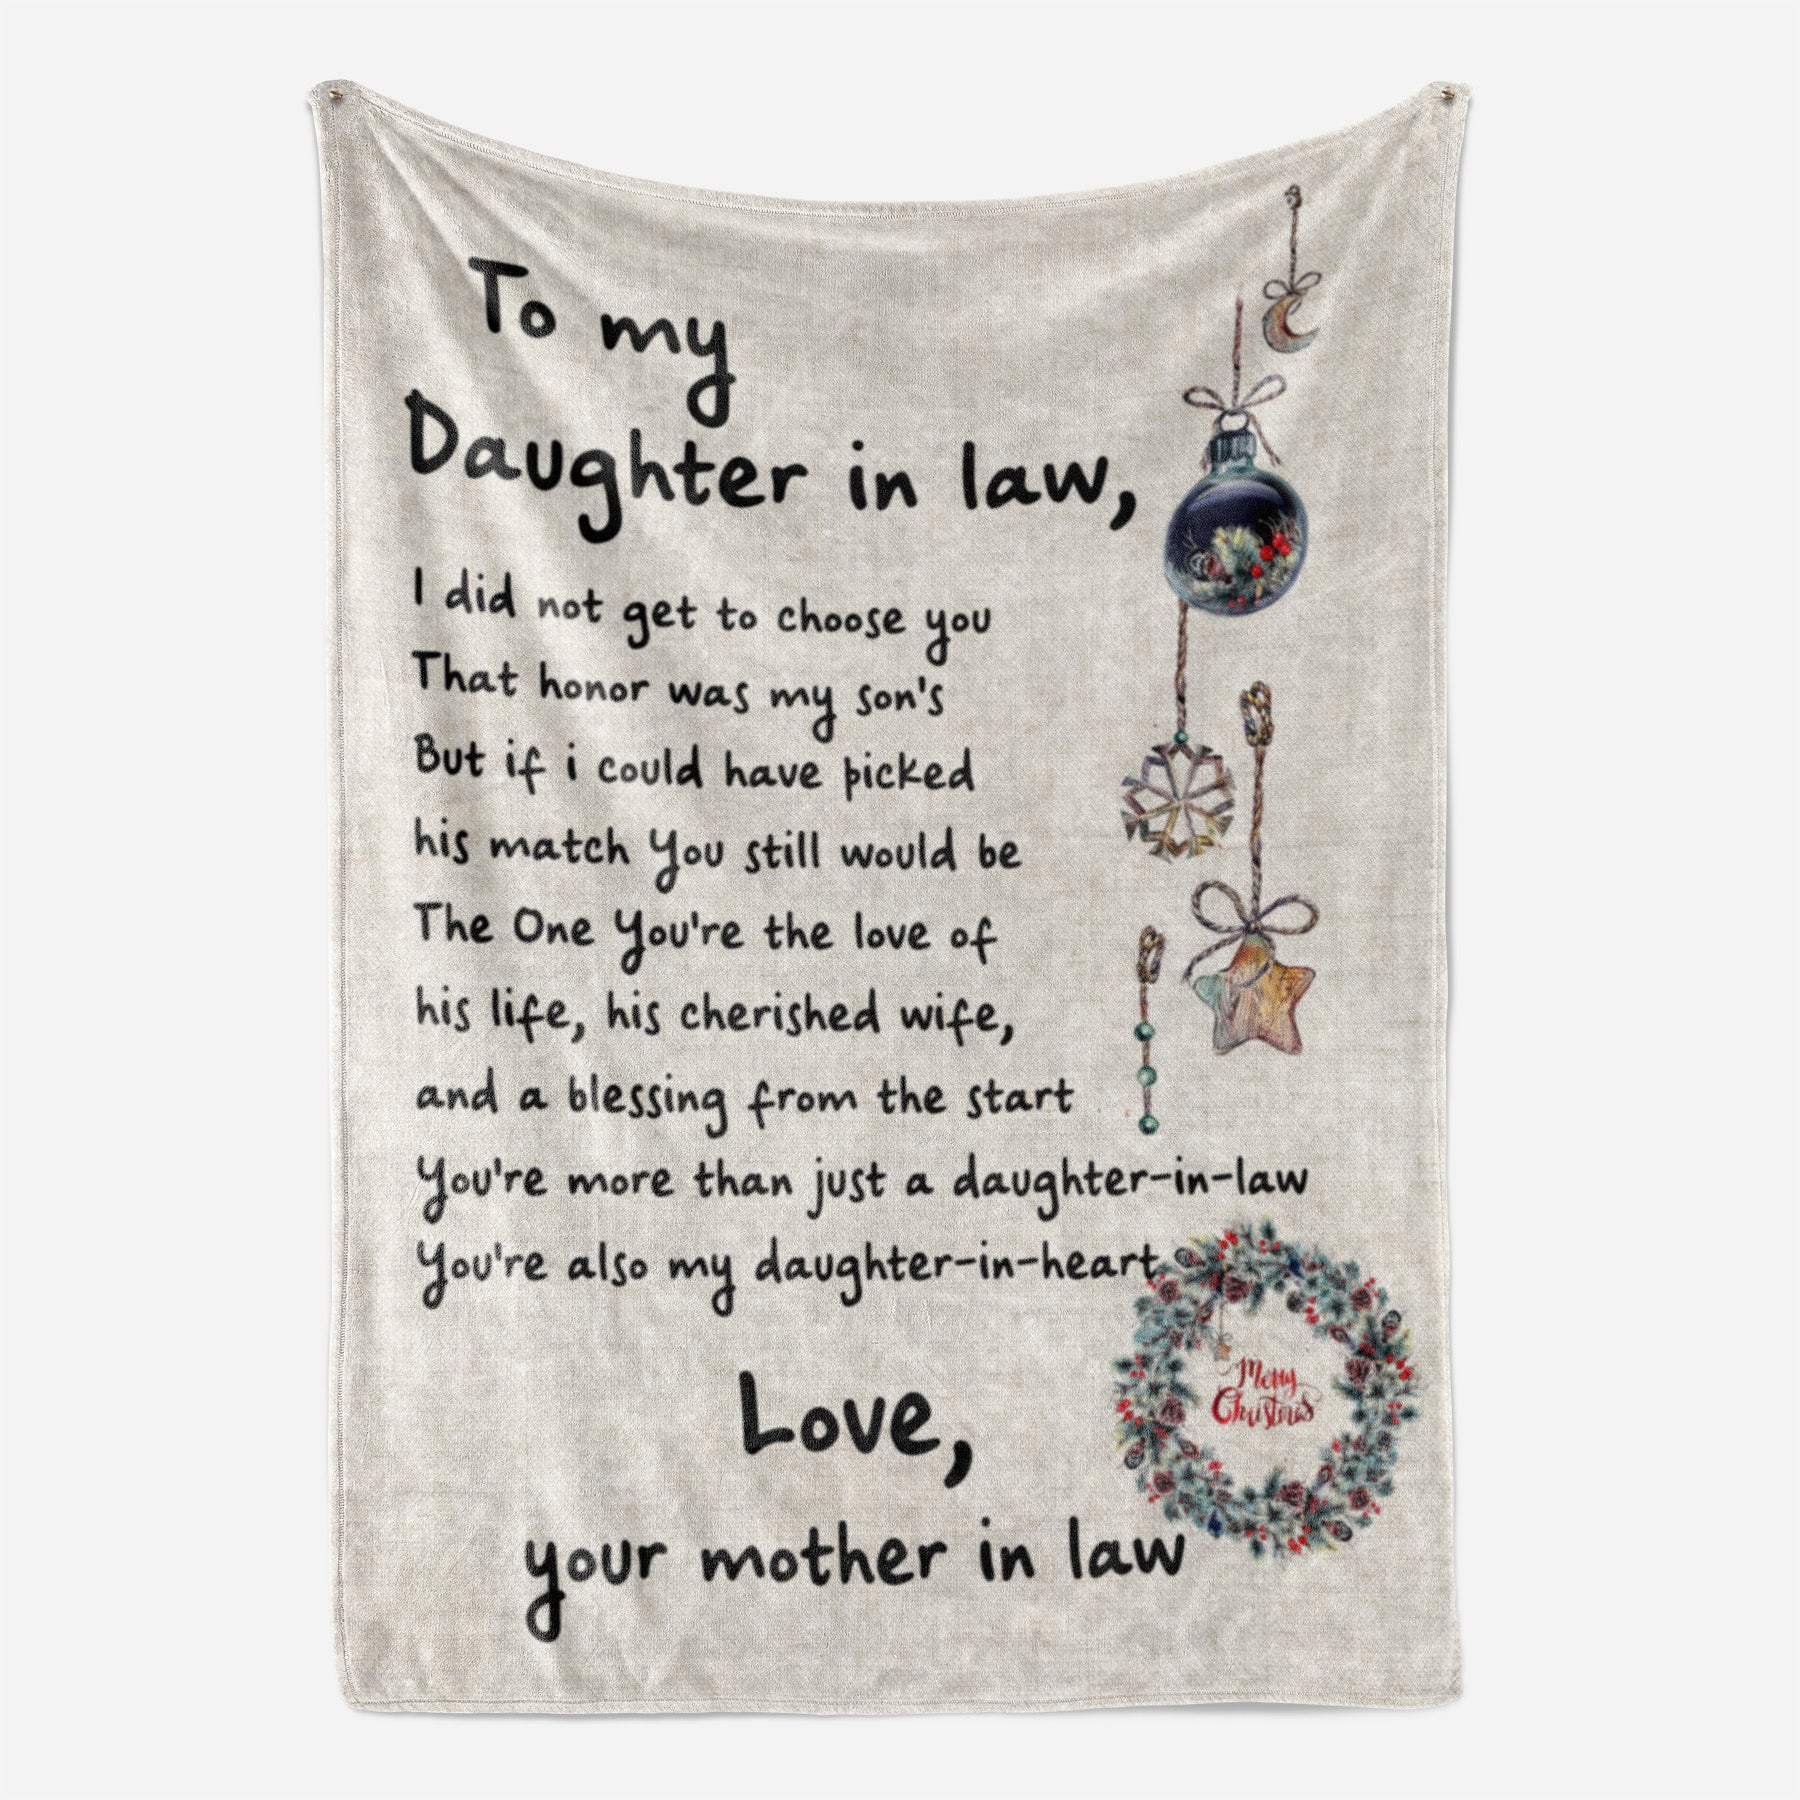 Christmas Blanket Gift For Daughter In Law, Personalized Gifts Daughter In Law, I did not Get